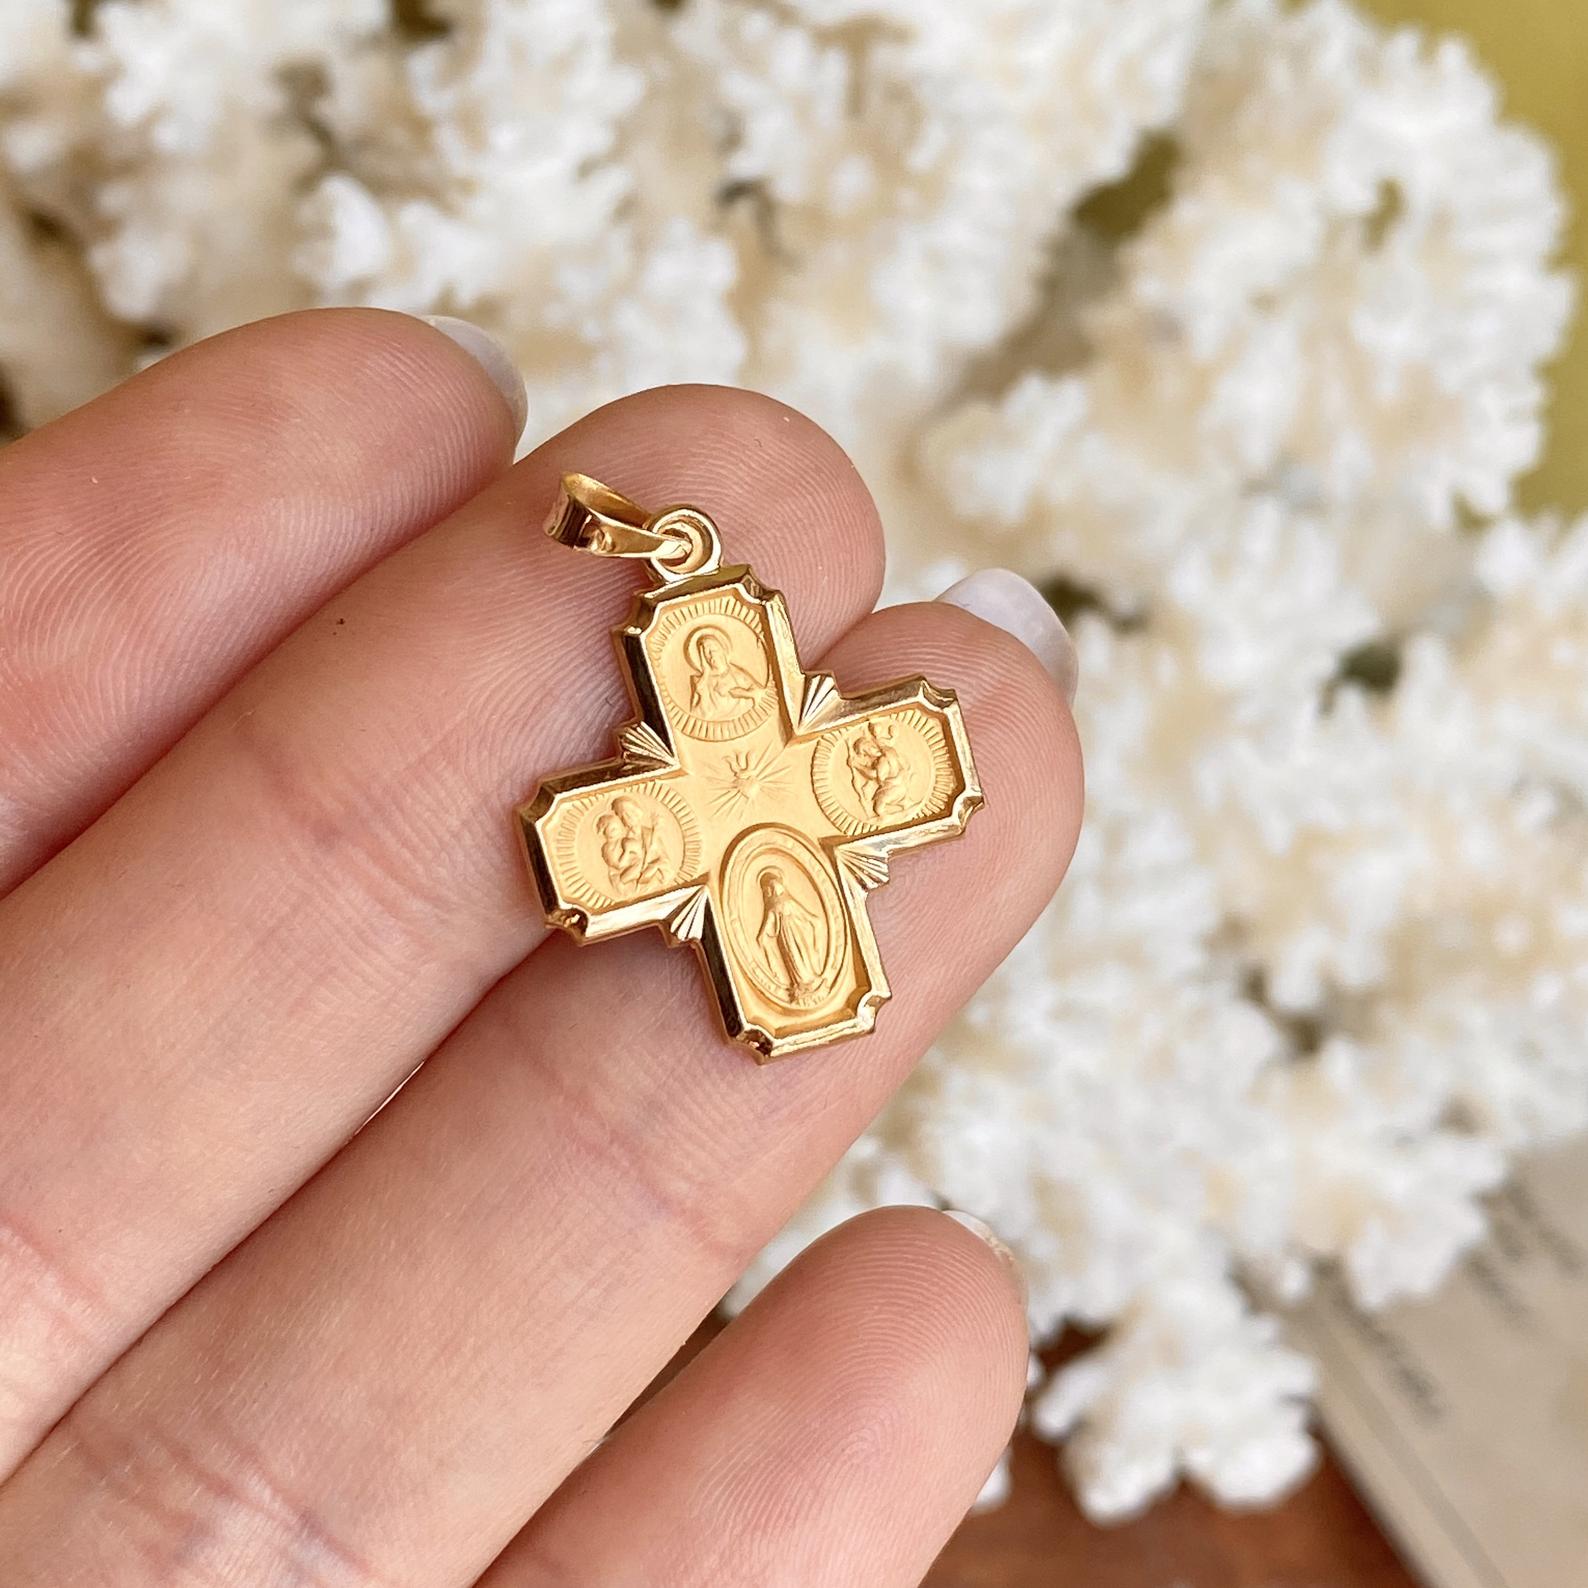 Holy Spirit Gold/Sterling Silver 4-Way Cross Medal Necklace by HMH Religious